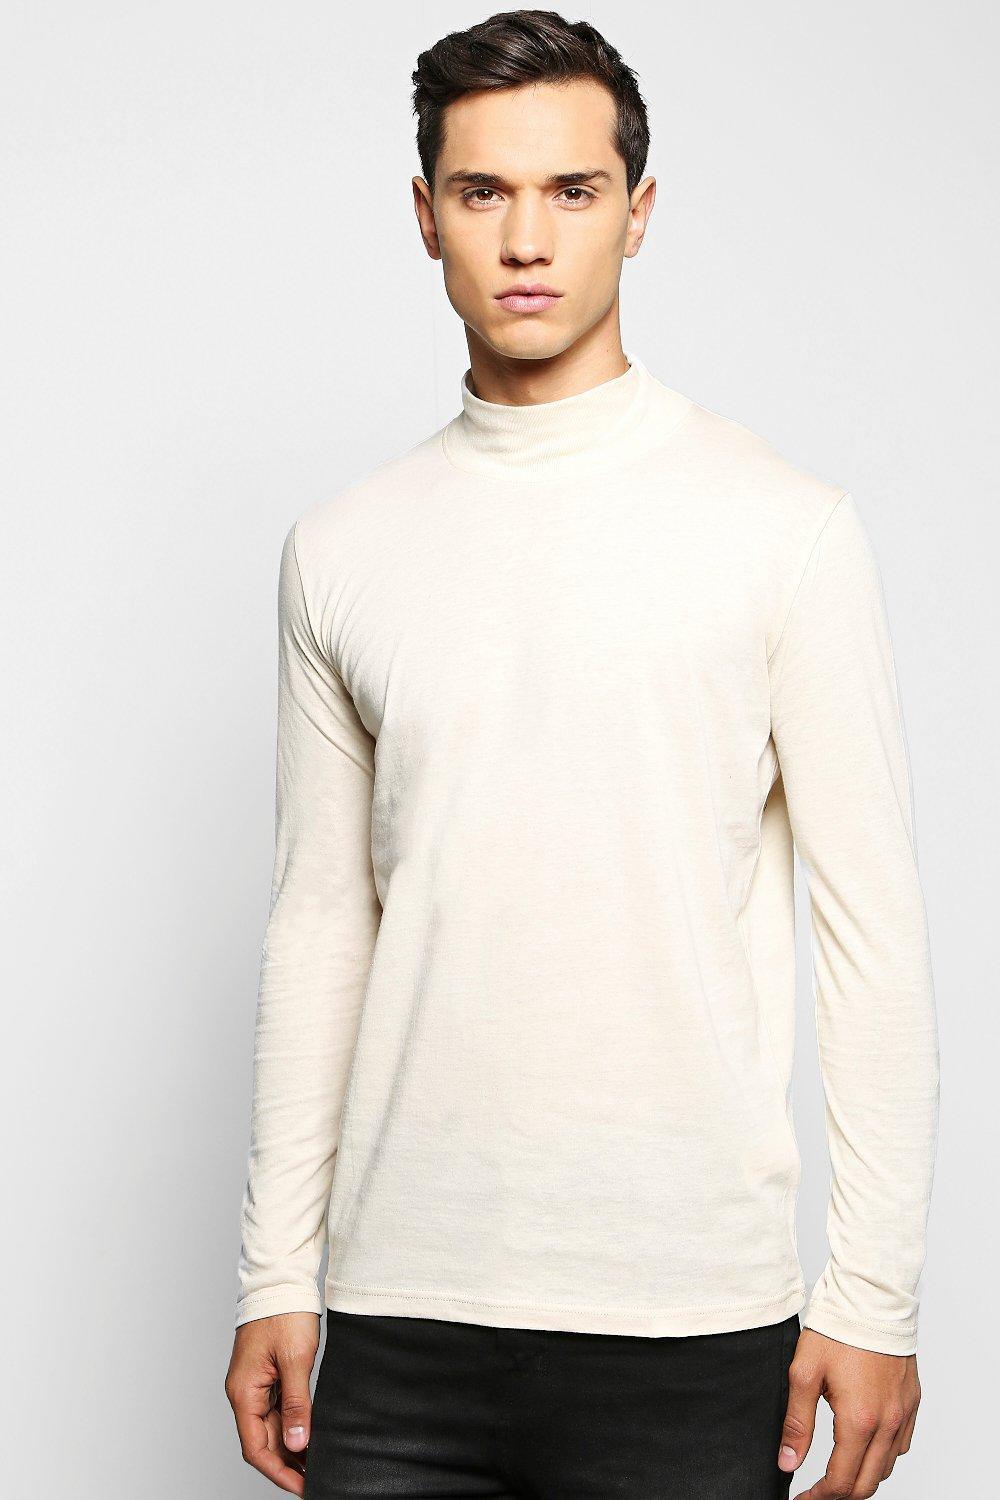 Boohoo Long Sleeve High Neck T Shirt in Natural for Men | Lyst